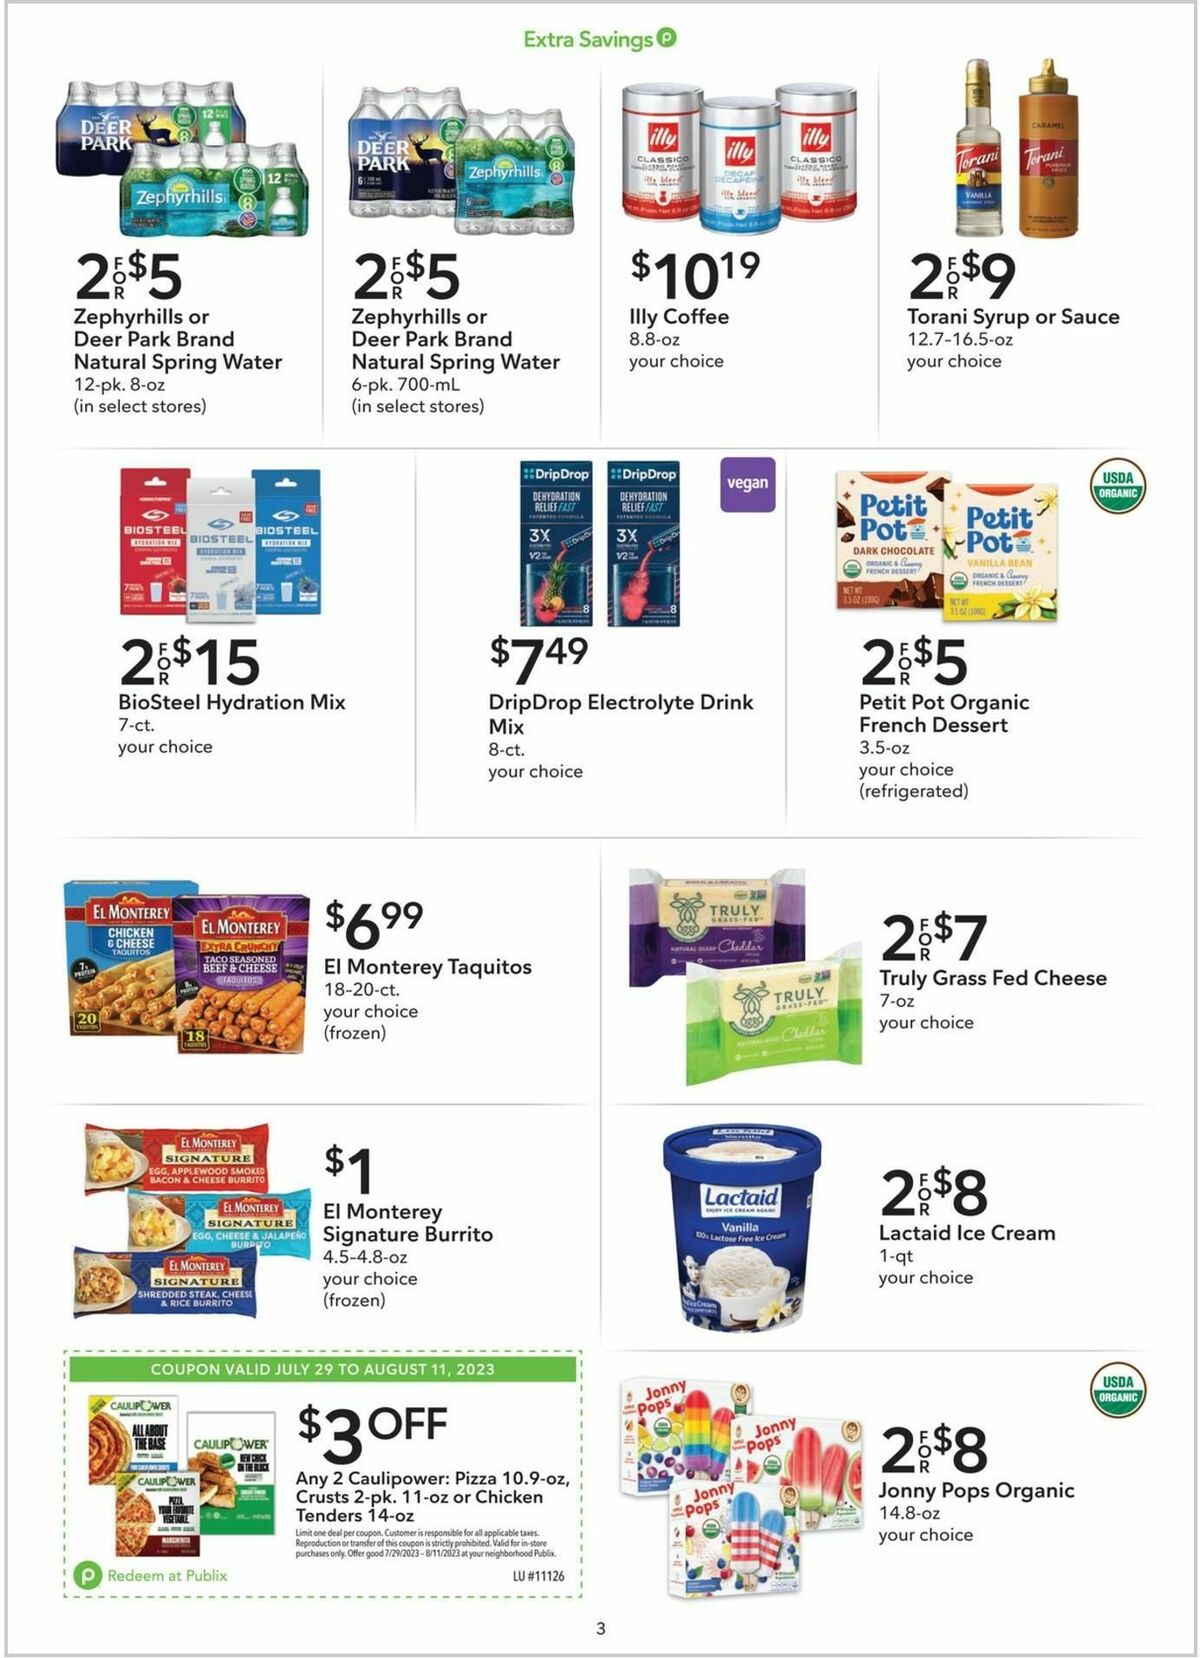 Publix Extra Savings Weekly Ad from July 29